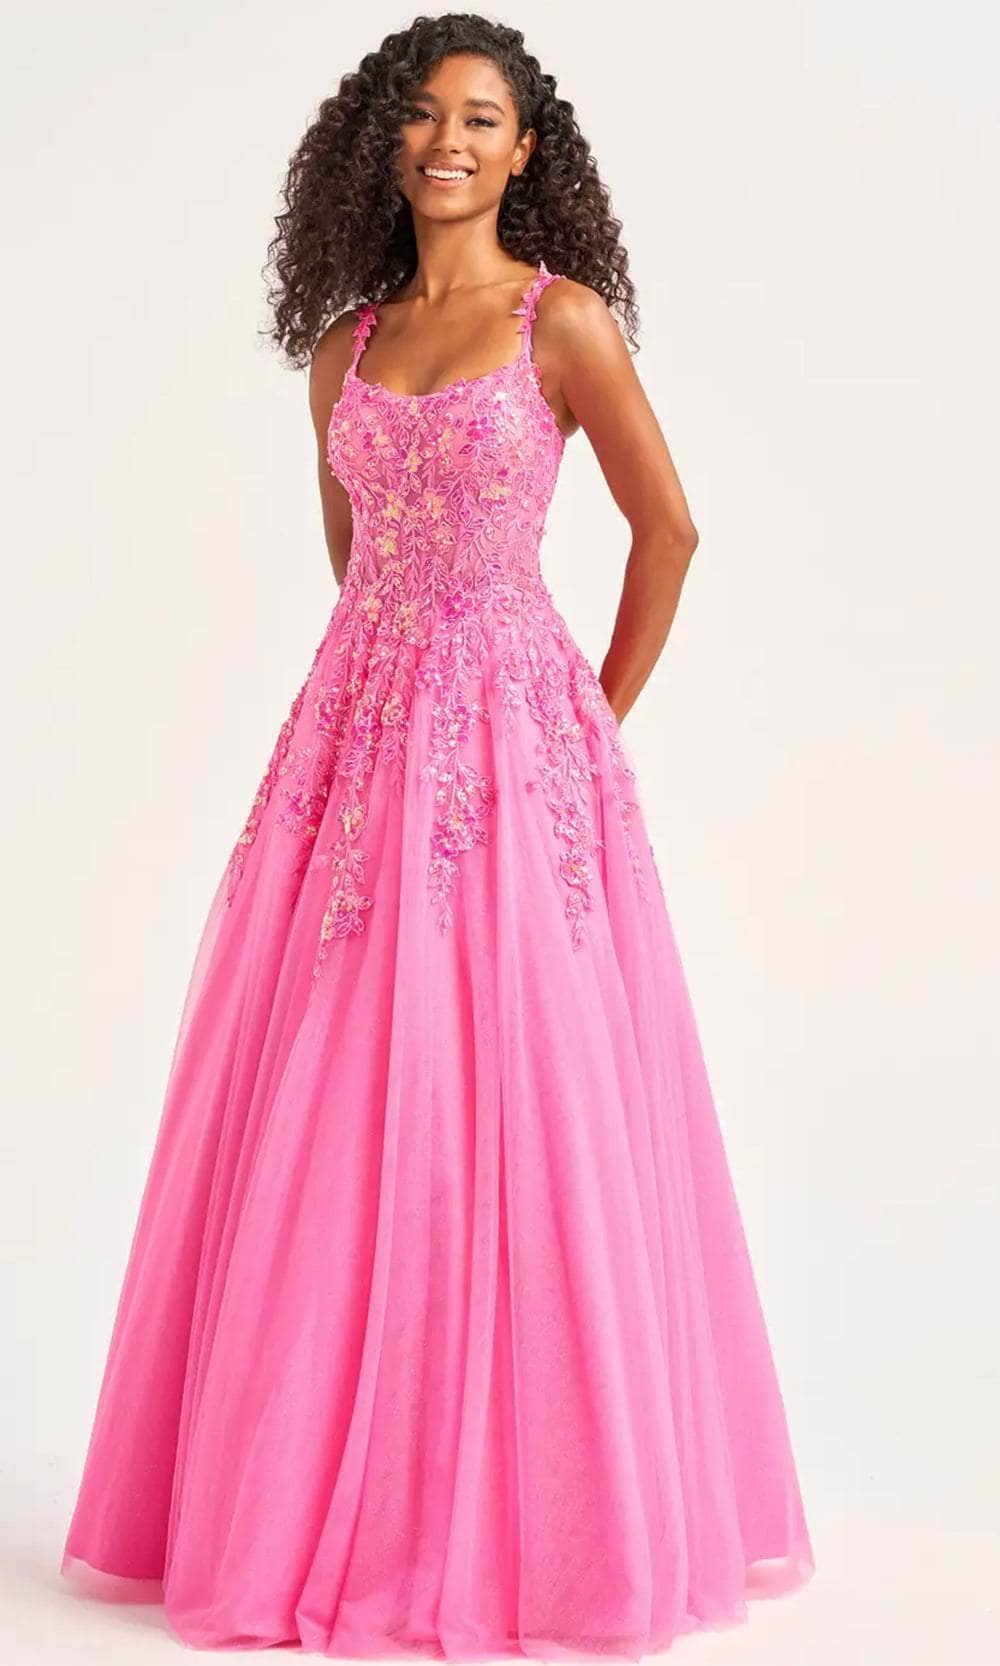 Ellie Wilde EW35123 - Embroidered Scoop Neck Prom Gown Prom Dresses 00 / Hot Pink